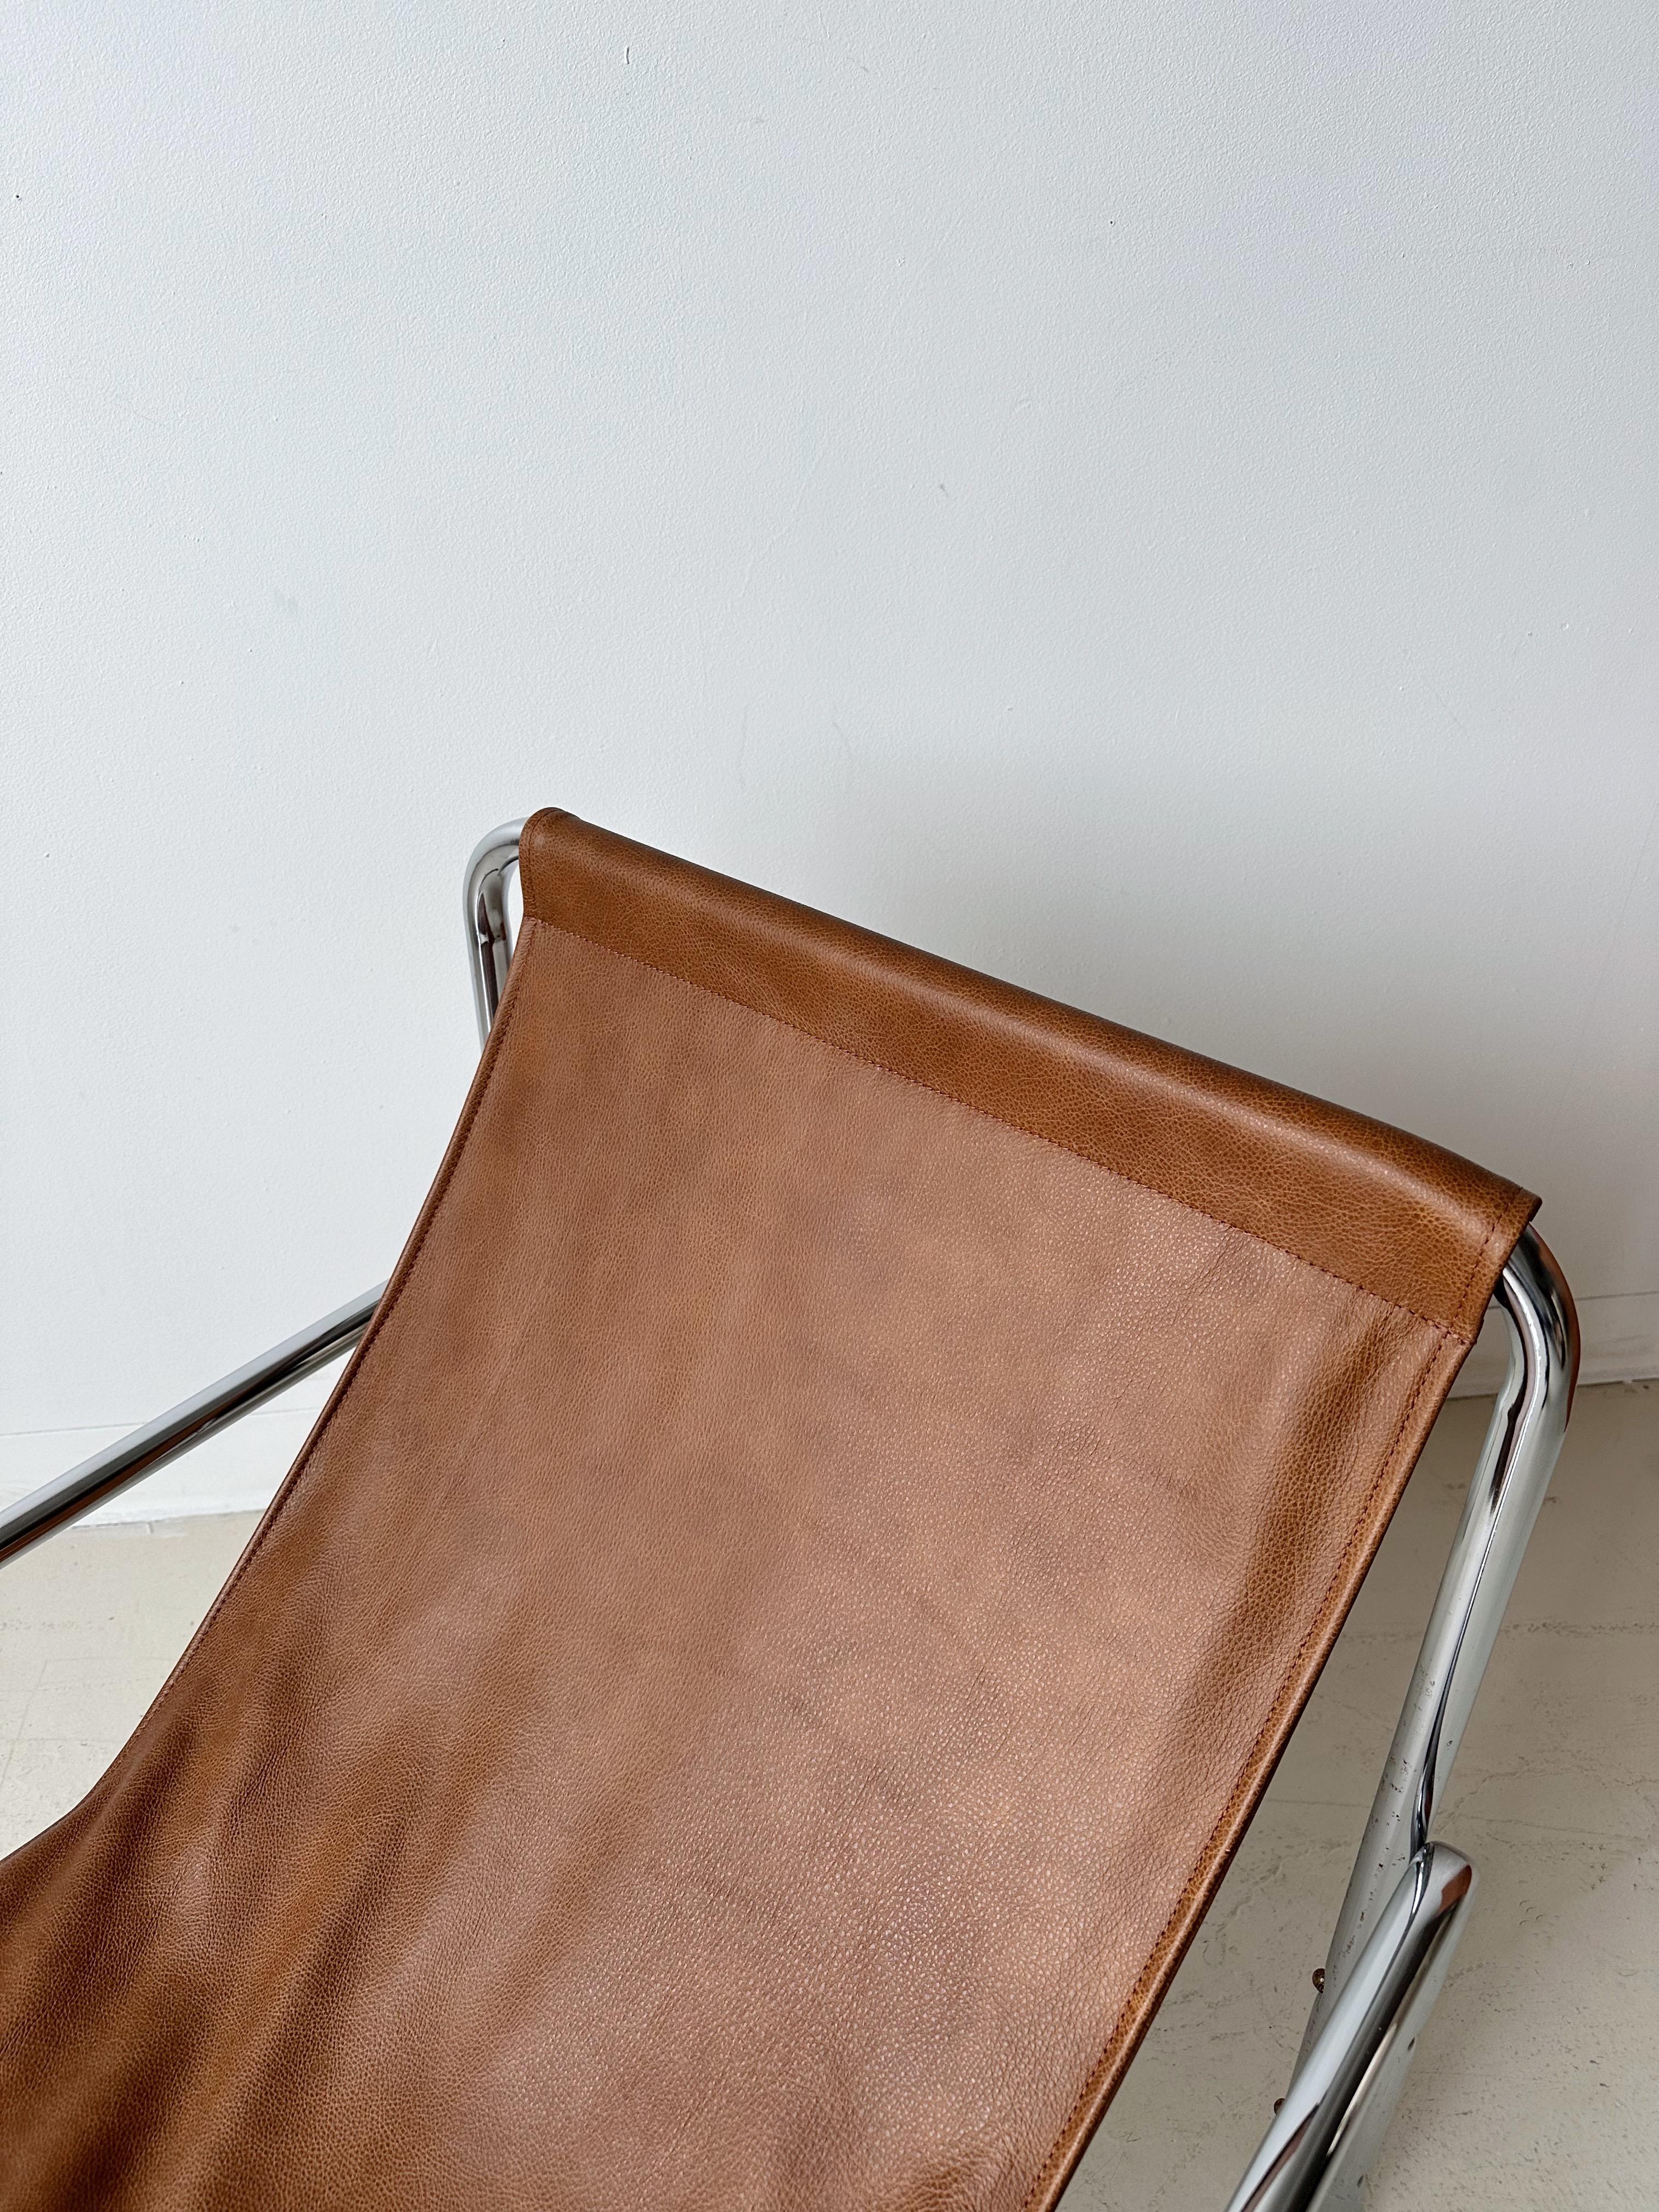 Tan Leather Sling Chair with Tubular Chrome Frame

//


Dimensions:

26”W x 27.5”D x 28”H  - seat height 13